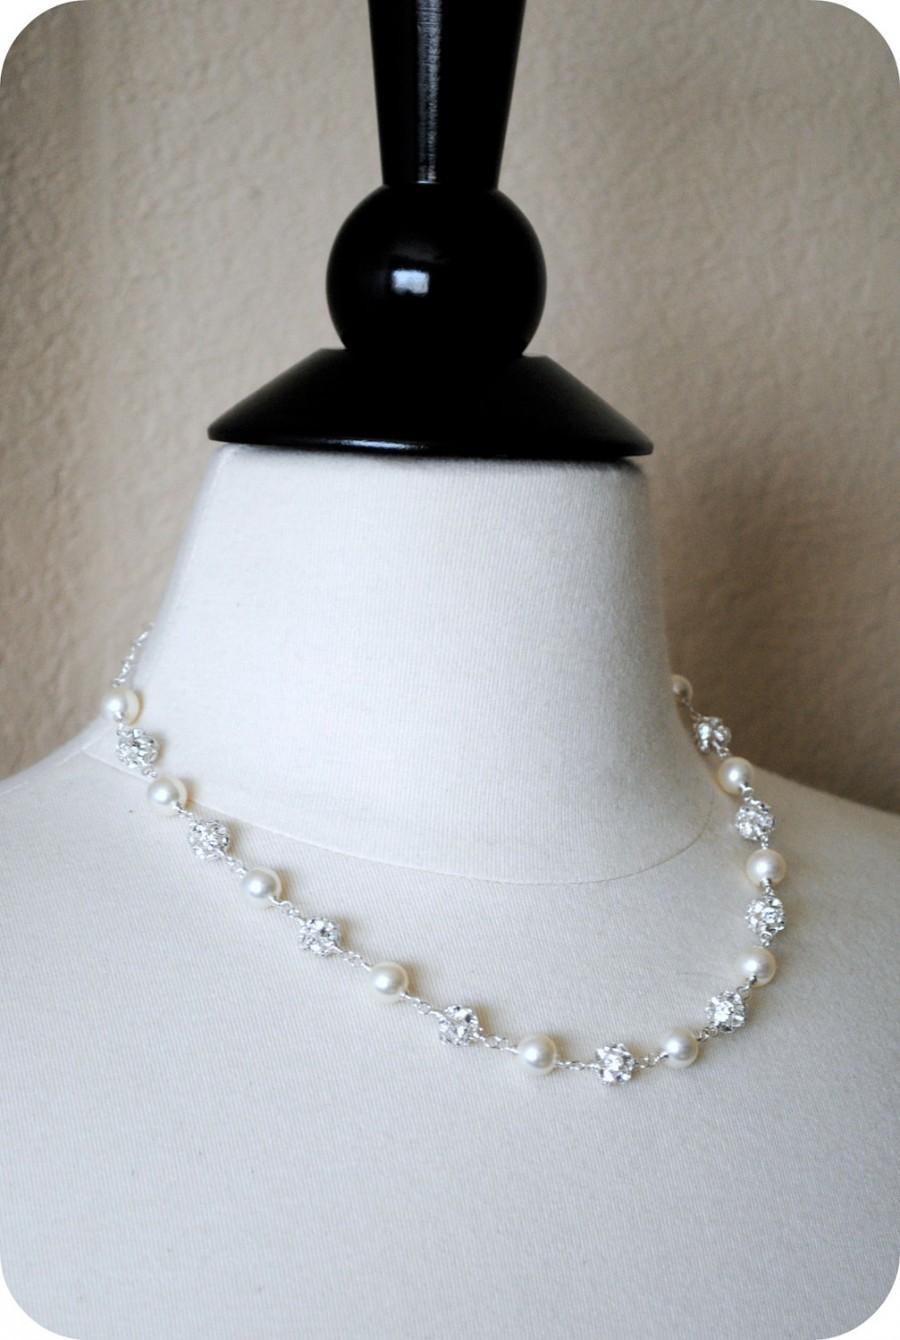 Mariage - Pearl Necklace, Bridal Rhinestone Necklace, Elegant Wedding Necklace, Couture Necklace, Long, Layered, Ivory, White, Wire Wrapped